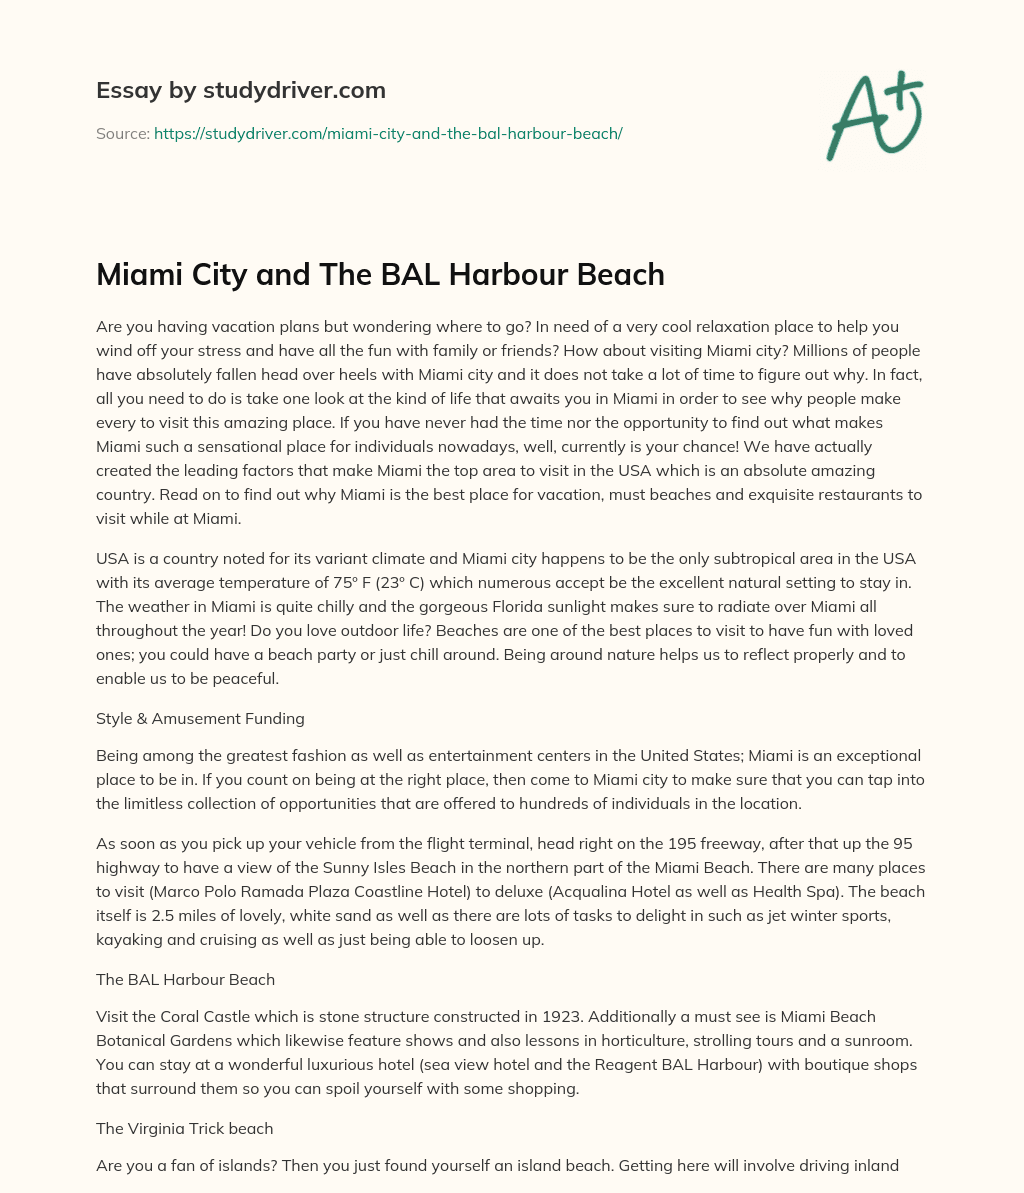 Miami City and the BAL Harbour Beach essay